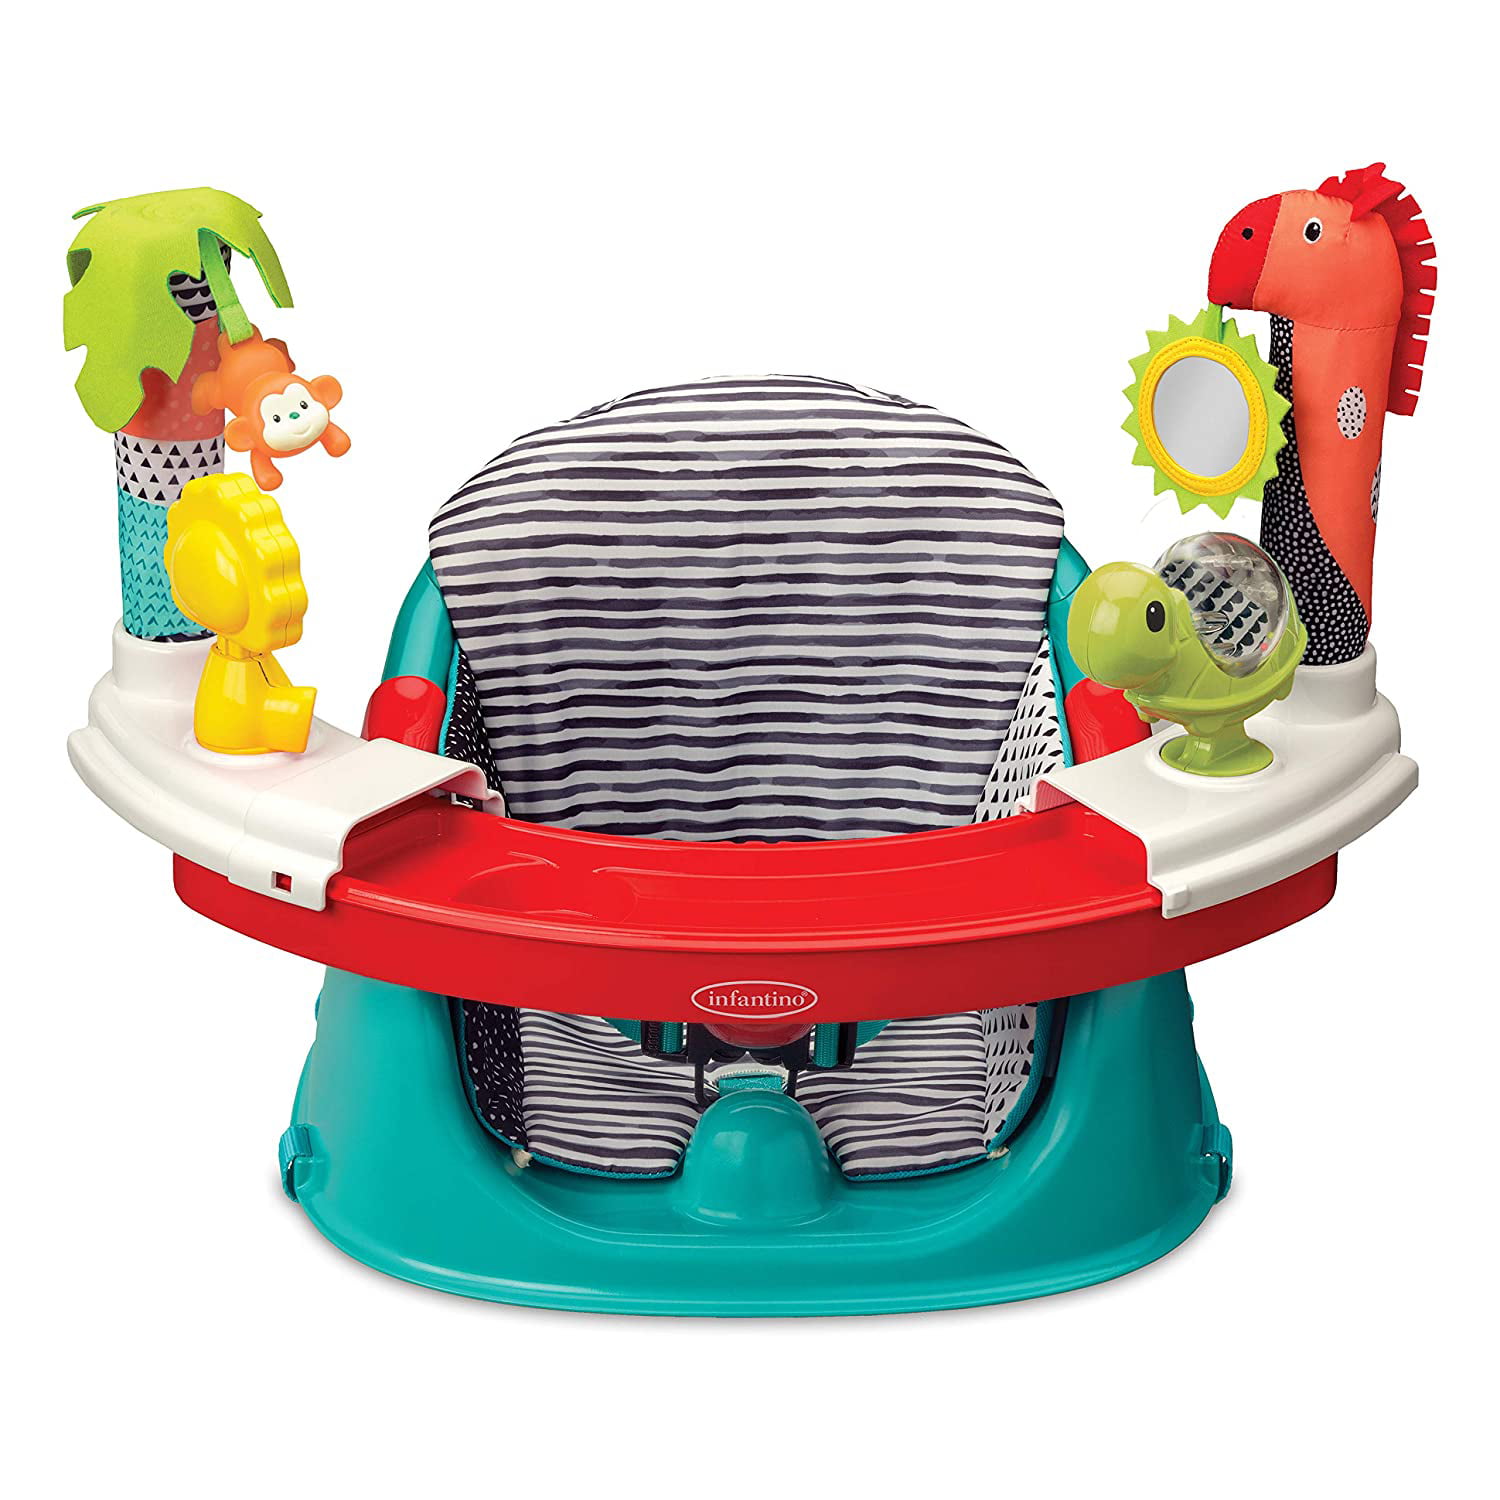 Infantino 3 in 1 Booster  Seat  Baby  Activity Seat  